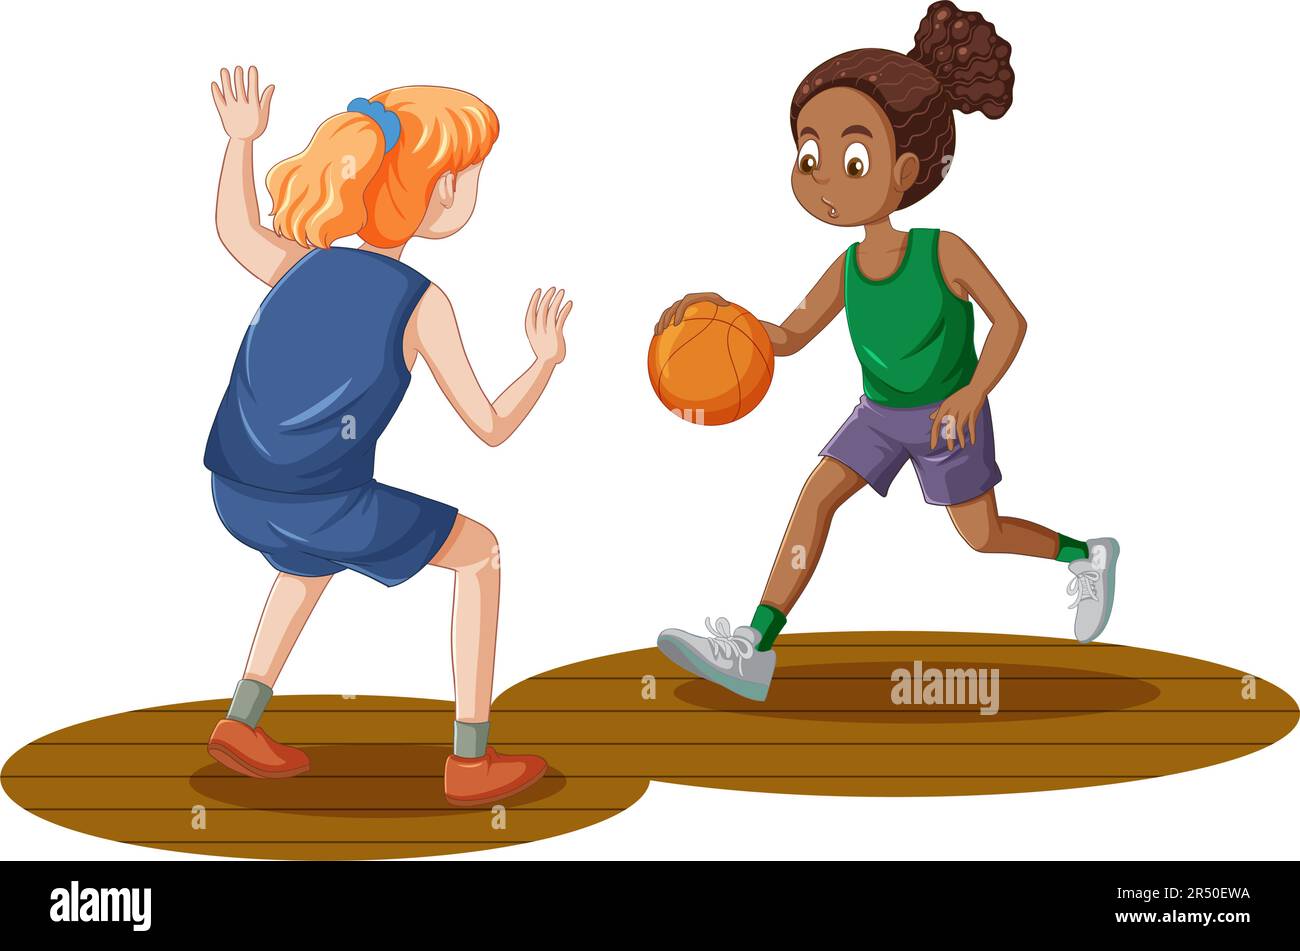 Two Adolescent Girls Playing Basketball illustration Stock Vector